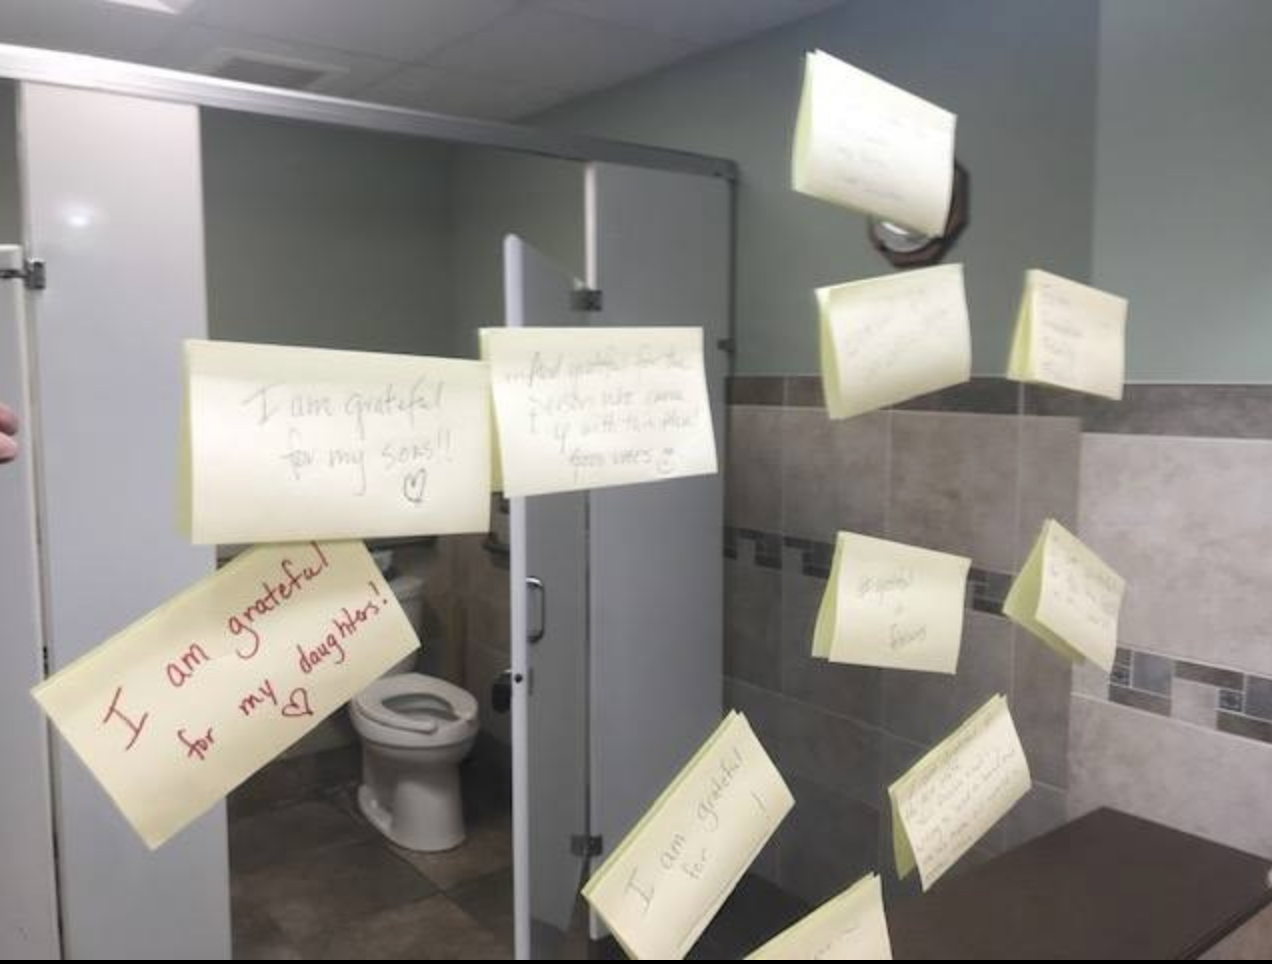 Sticky notes attached to a mirror in the Clear Lake office.